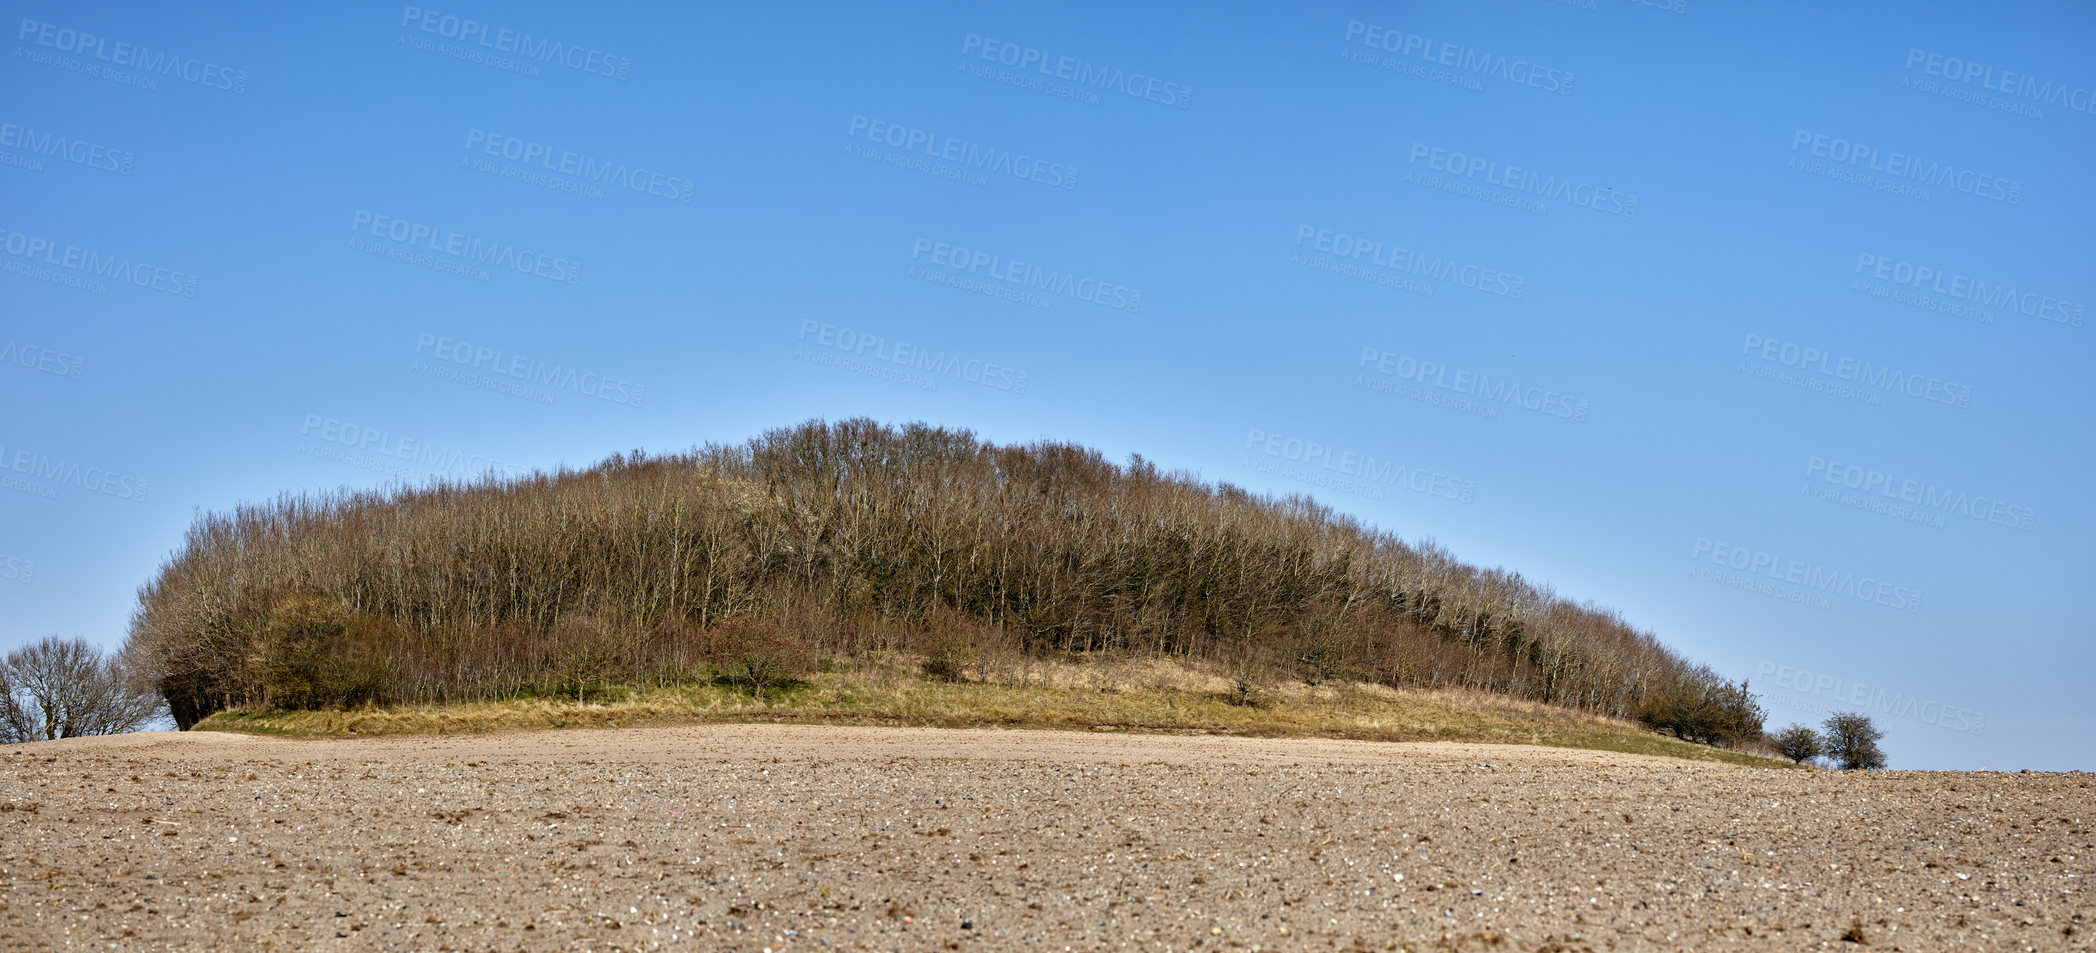 Buy stock photo Trees on a sandy farm with blue sky copy space. Nature landscape of a dry bush tree branches growing near cultivated land in a sustainable environment, East Coast of Jutland, Denmark